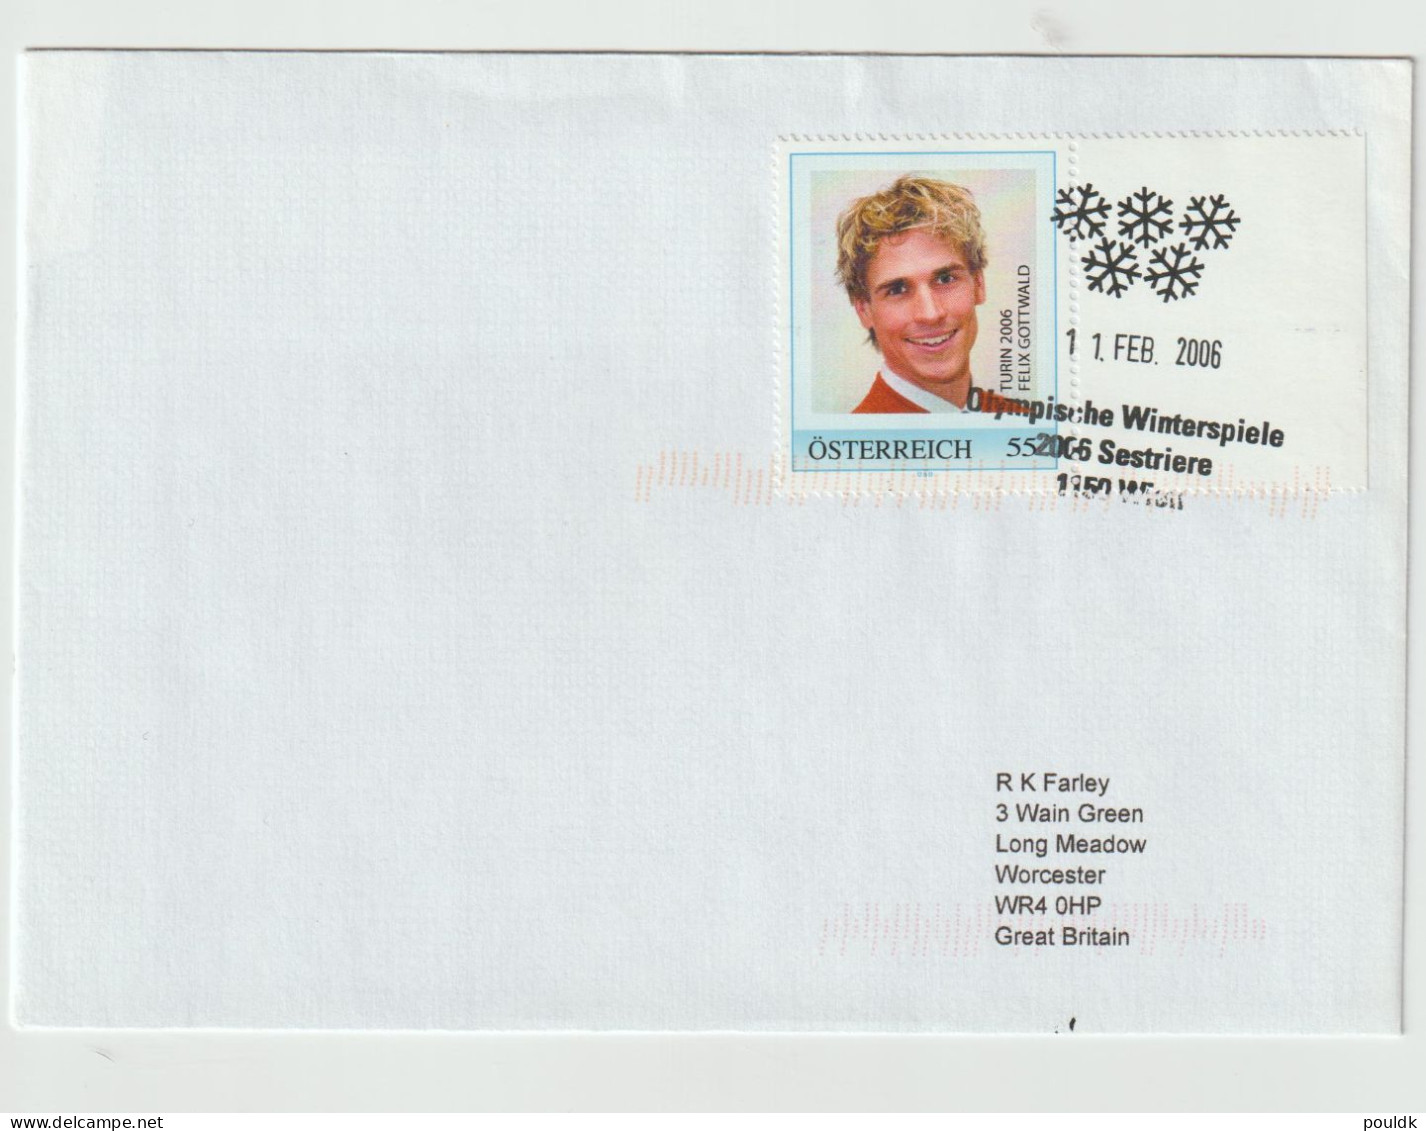 Personalized Stamp From Austria Used On Cover: Felix Gottwald, An Austrian Nordic Combined Athlete With Several Olympic - Winter 2006: Torino